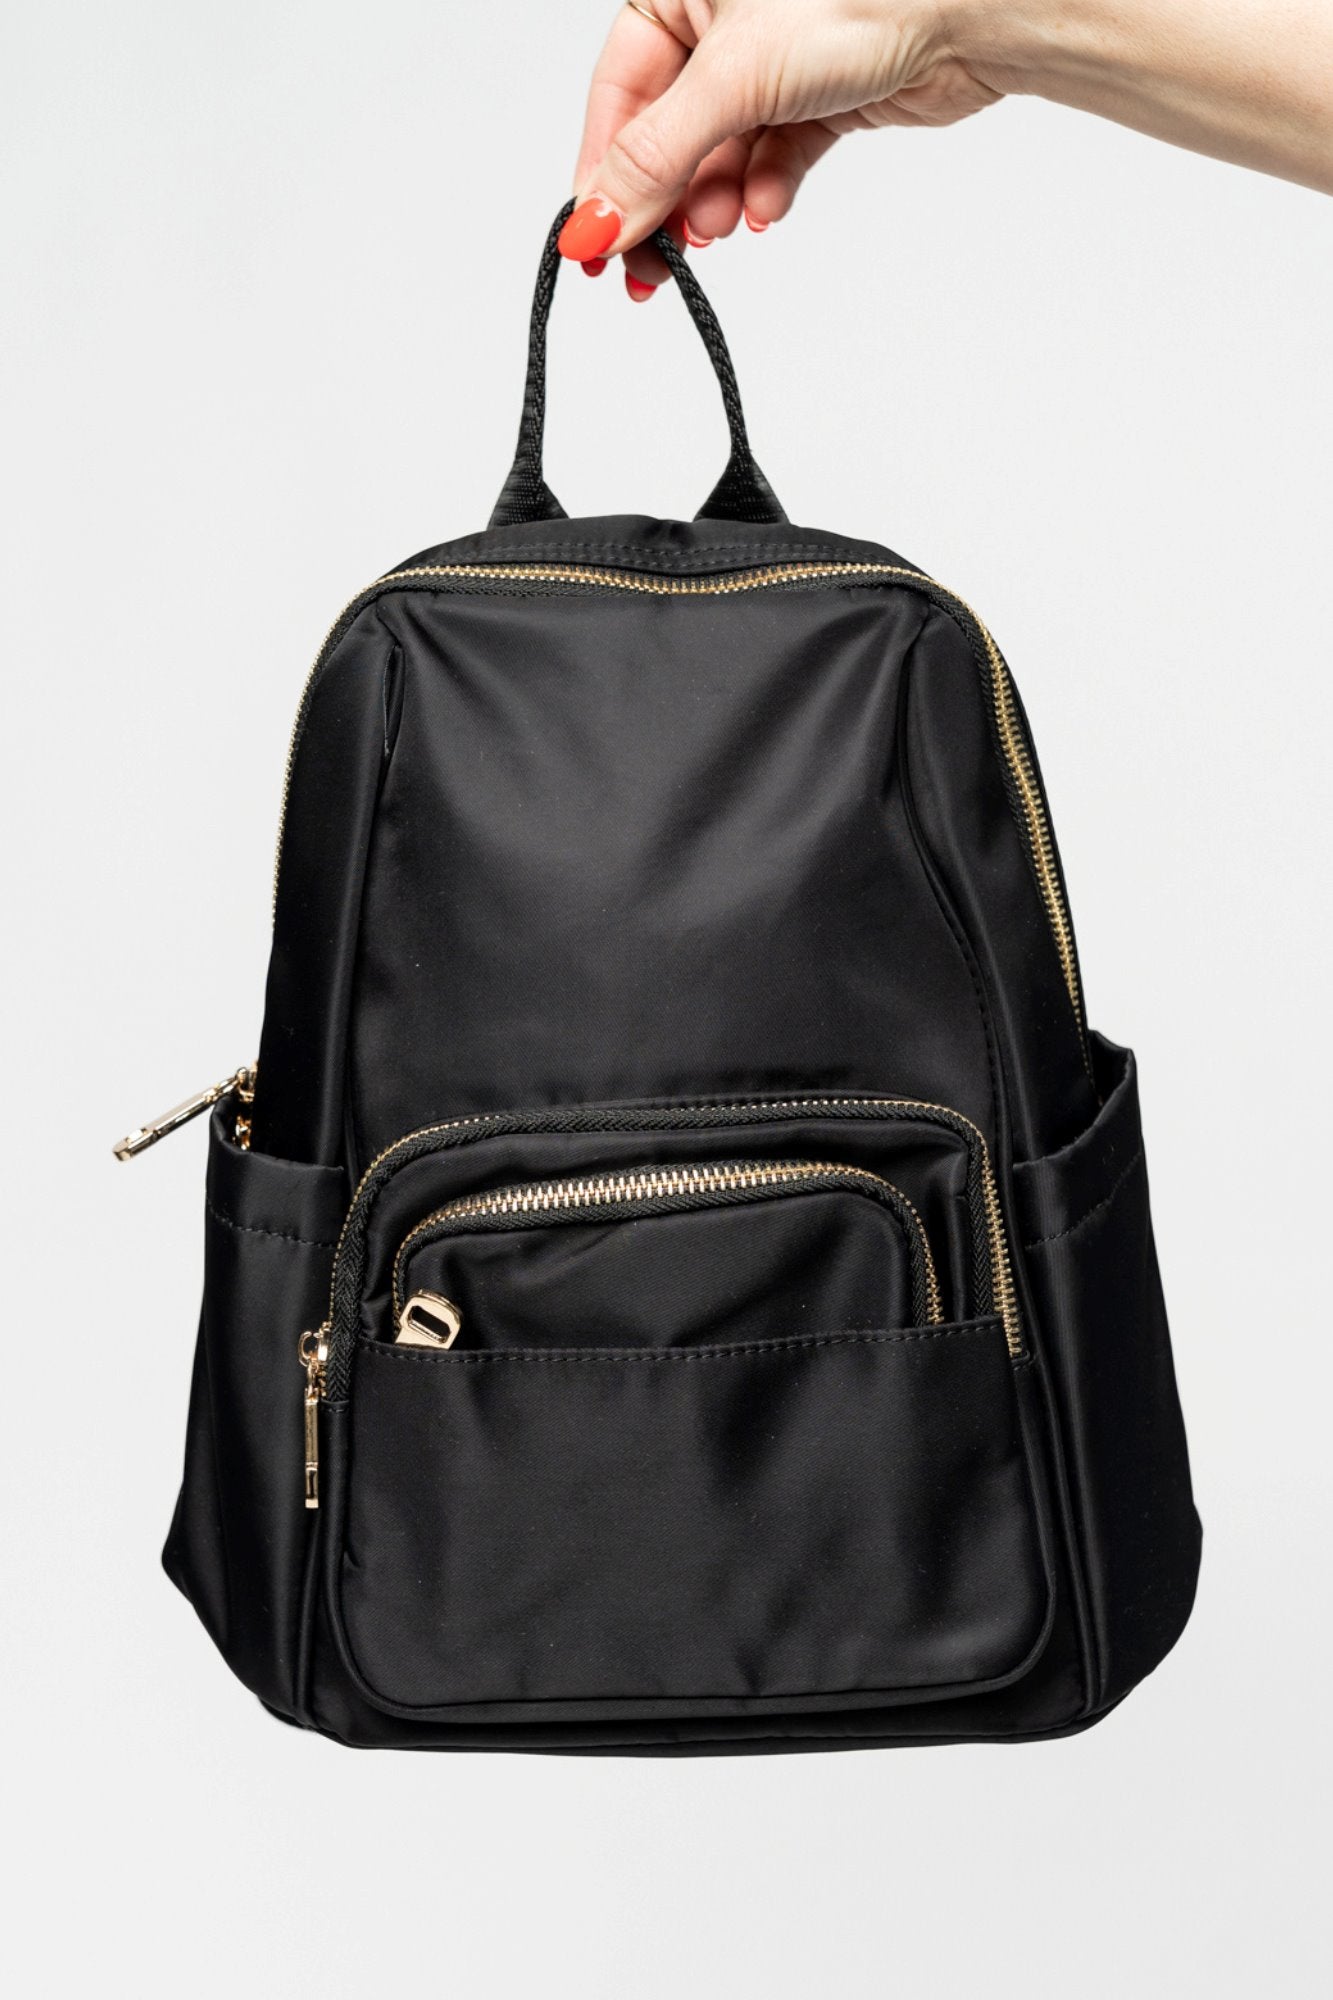 Sutton Bag in Black Holley Girl 